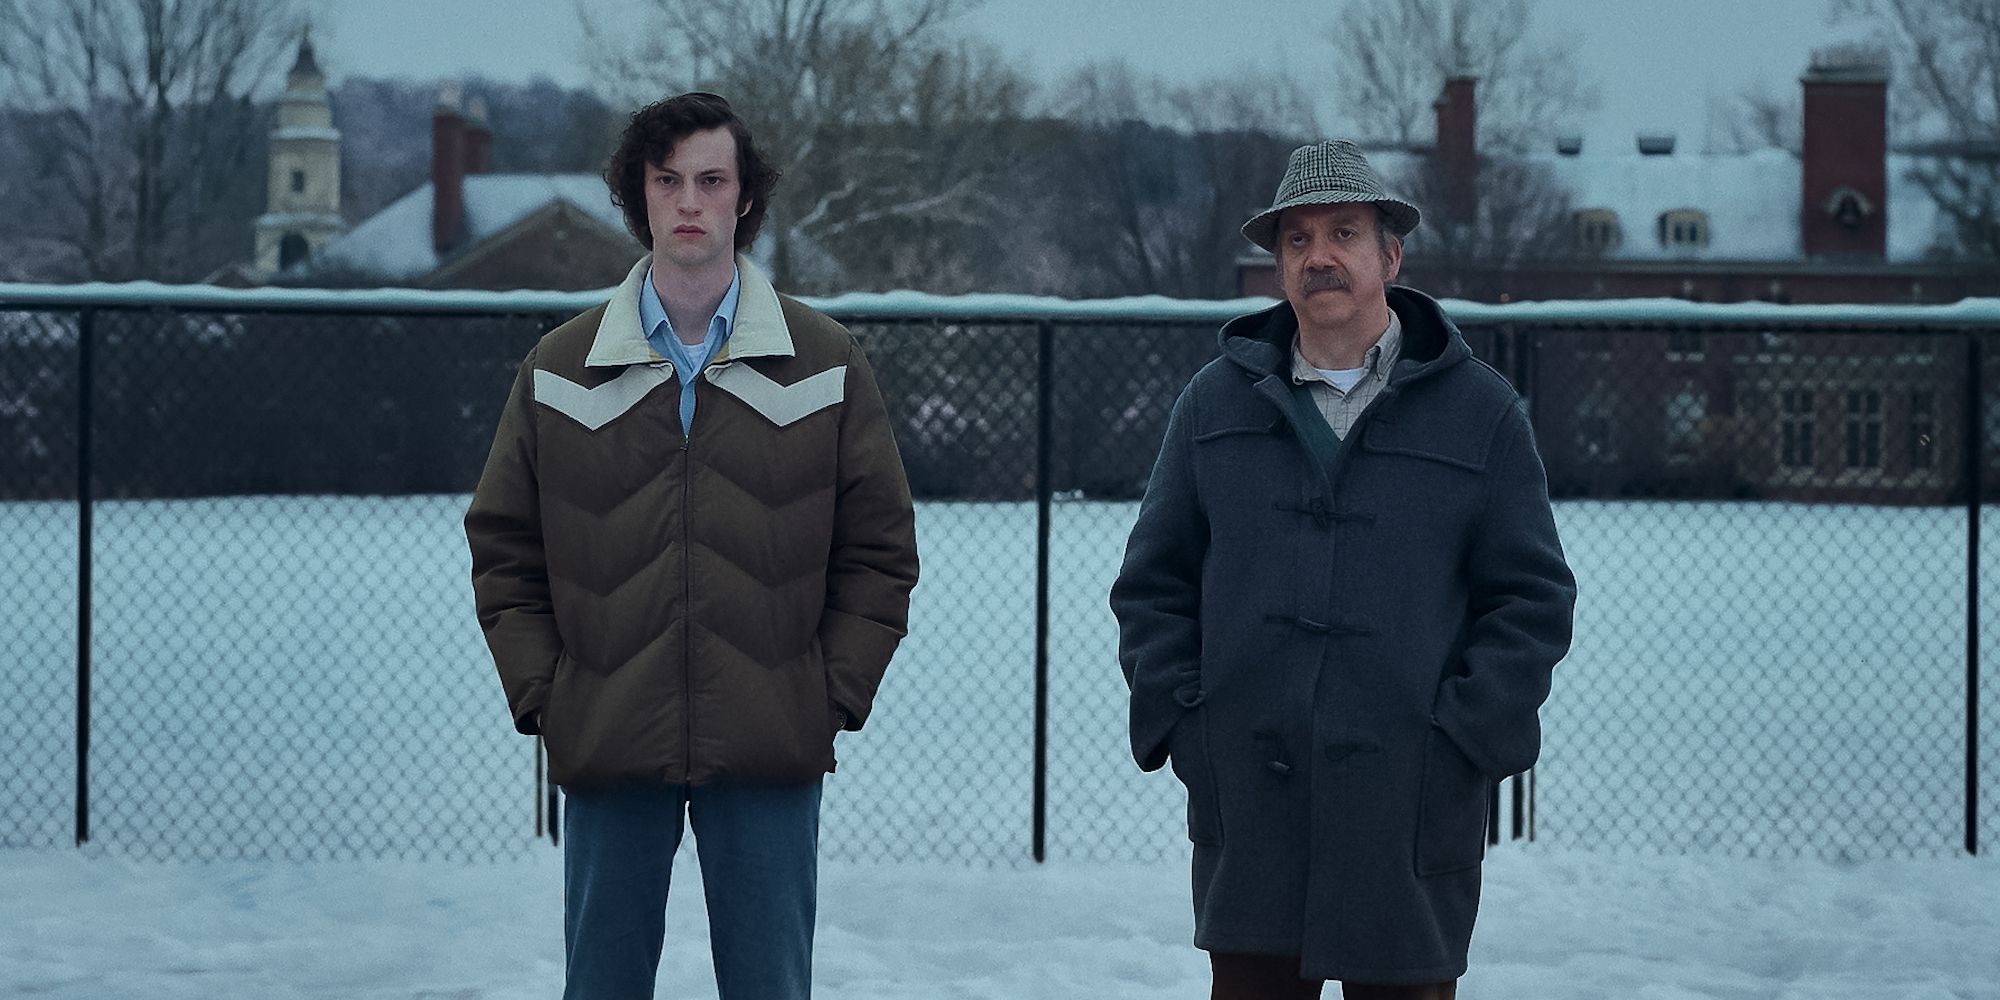 Paul Giamatti and Dominic Sessa as Angus and Paul standing in snow in The Holdovers